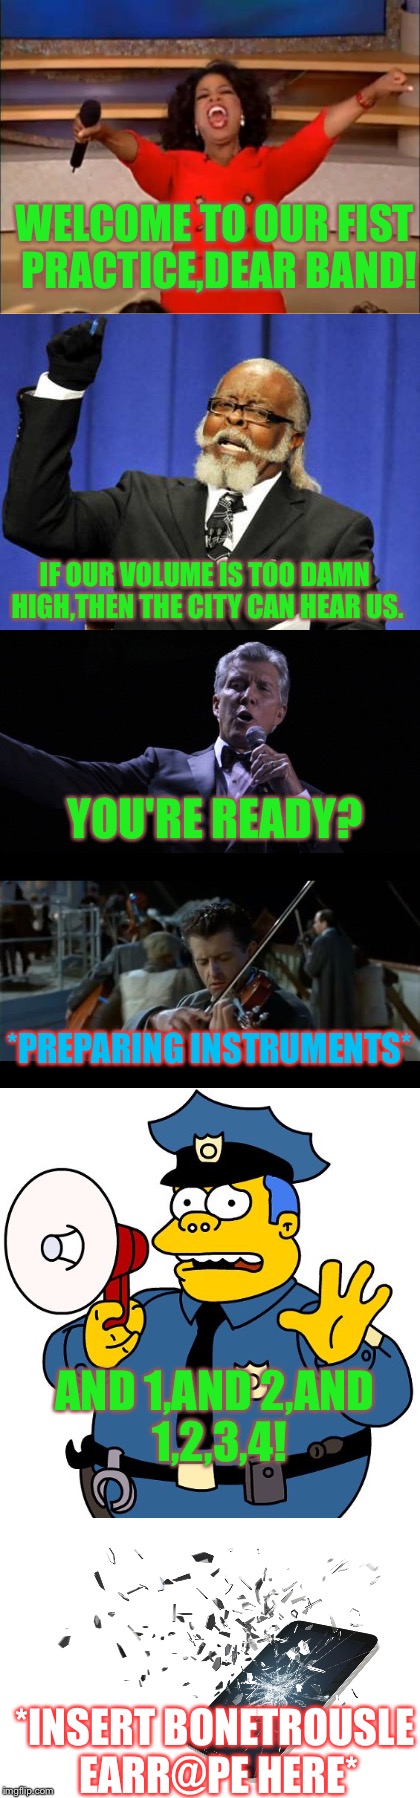 First practice | WELCOME TO OUR FIST PRACTICE,DEAR BAND! IF OUR VOLUME IS TOO DAMN HIGH,THEN THE CITY CAN HEAR US. YOU'RE READY? *PREPARING INSTRUMENTS*; AND 1,AND 2,AND 1,2,3,4! *INSERT BONETROUSLE EARR@PE HERE* | image tagged in memes,band,first,practice | made w/ Imgflip meme maker